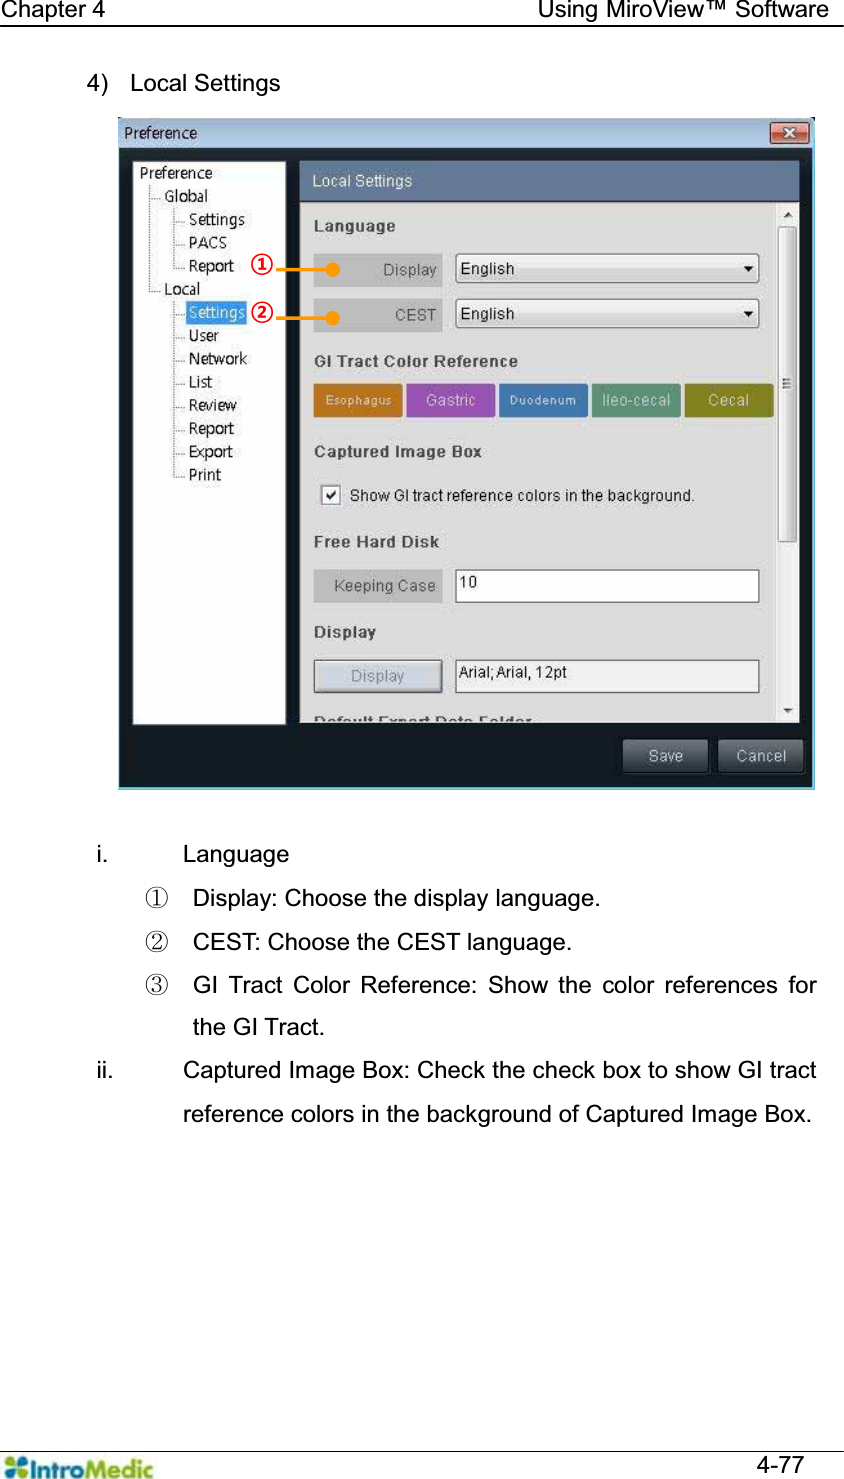   Chapter 4                                    Using 0LUR9LHZ Software  4-77 4) Local Settings  i. Language ཛ  Display: Choose the display language. ཛྷ  CEST: Choose the CEST language. ཝ  GI Tract Color Reference: Show the color references for the GI Tract. ii.  Captured Image Box: Check the check box to show GI tract reference colors in the background of Captured Image Box.  ¢ £ 